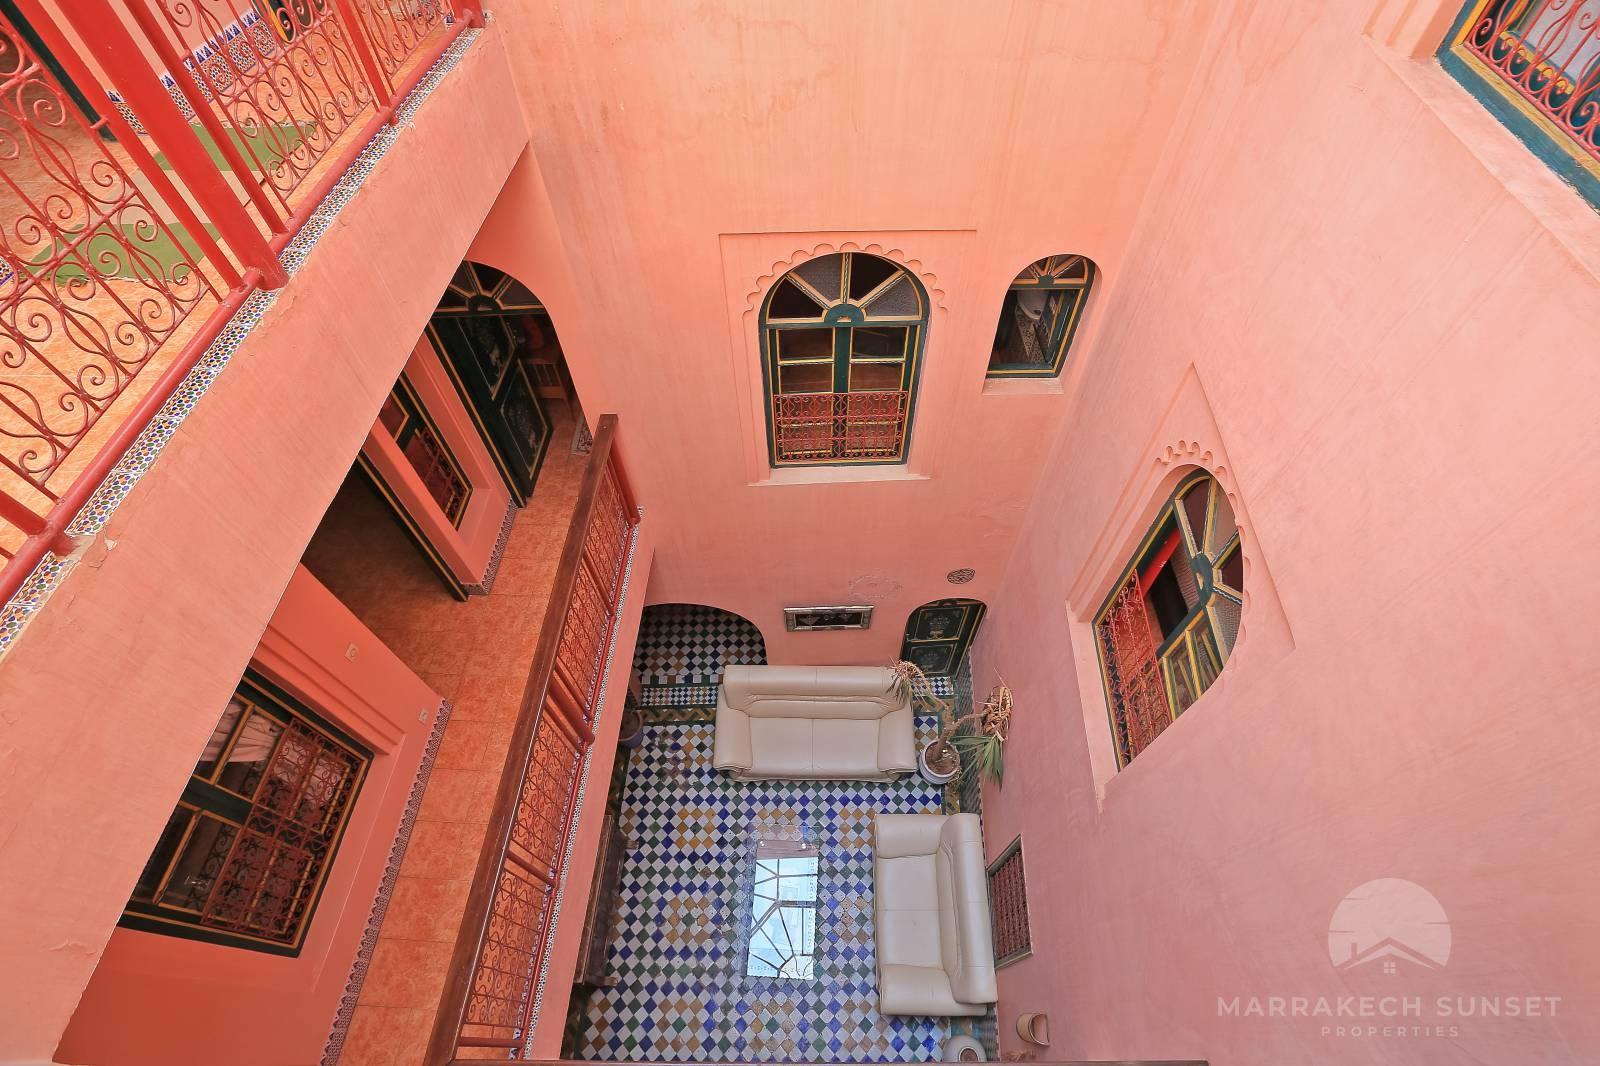 An exceptional 6 bedroom Marrakech riad for sale near Jemaa el fna square